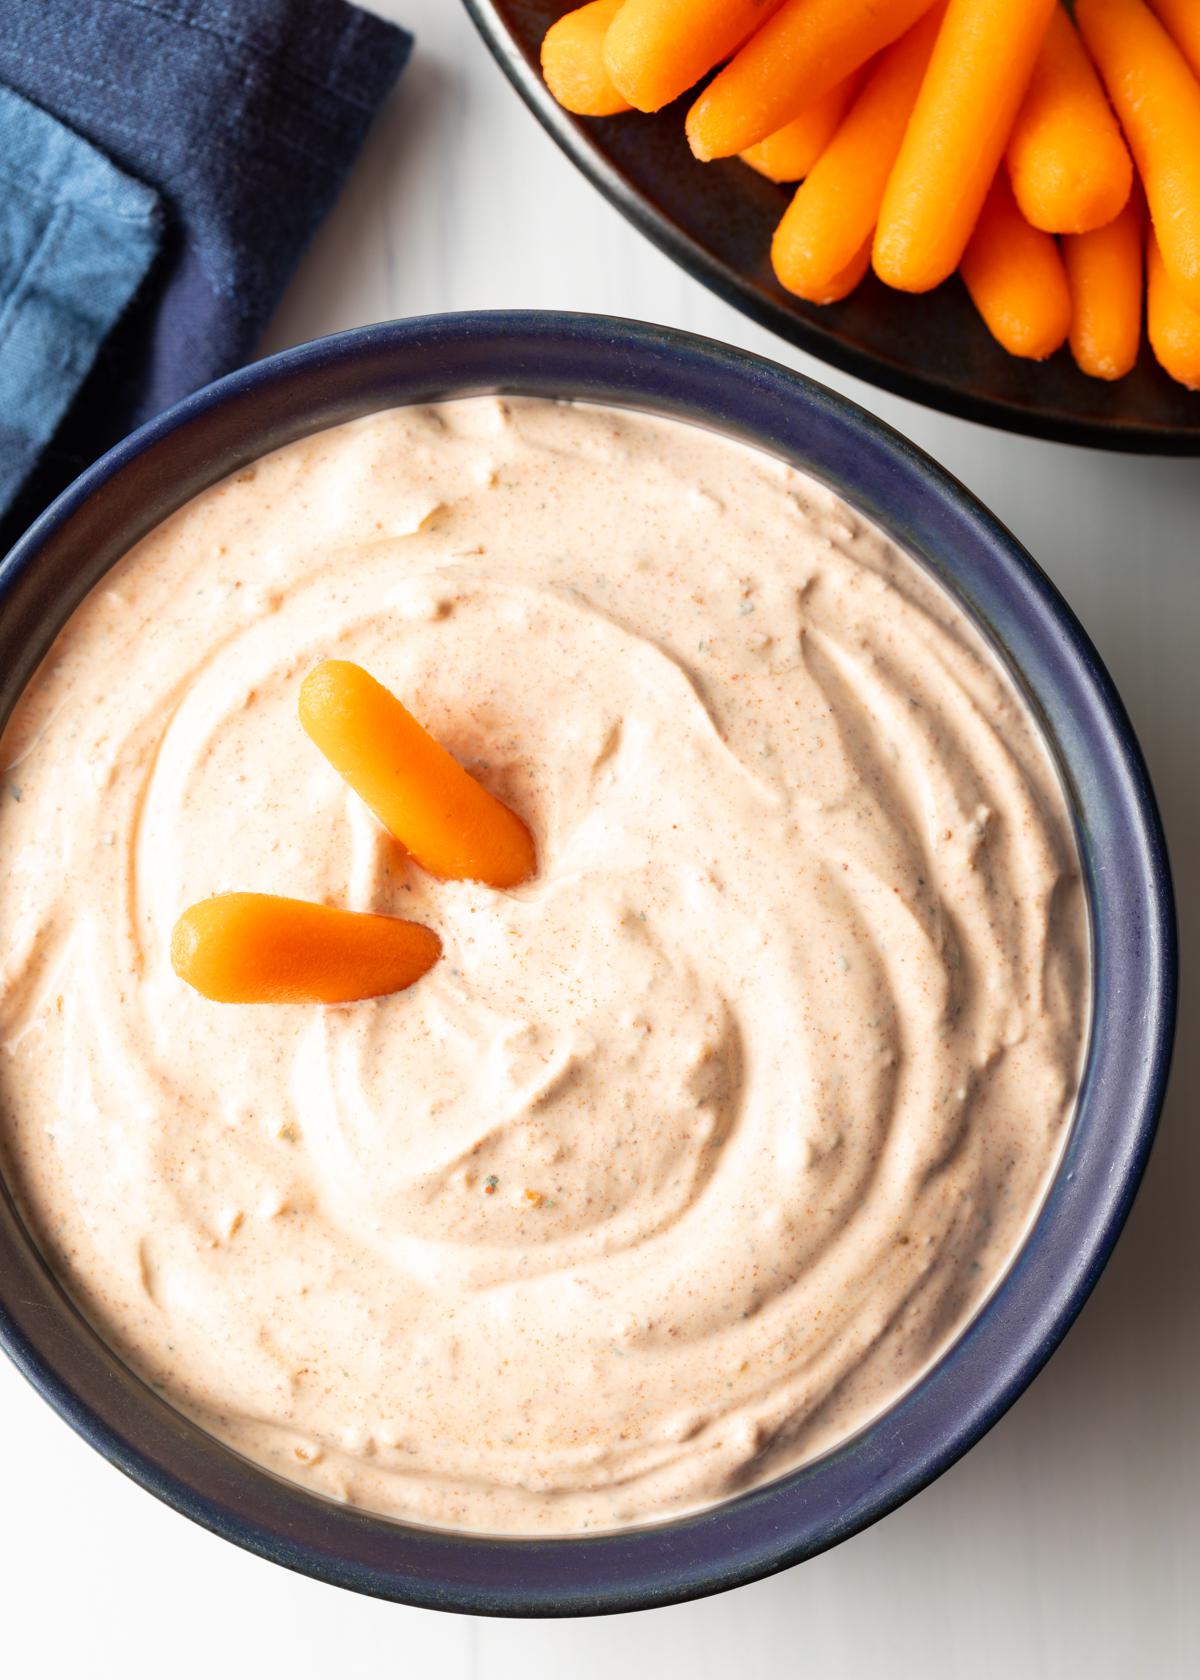 We're throwing it back to elementary school days with a dip that's perfect for carrots, celery, and all other kinds of finger foods. (via <strong><a href="https://www.aspicyperspective.com/3-ingredient-magic-taco-dip-recipe/">A Spicy Perspective</a></strong>)